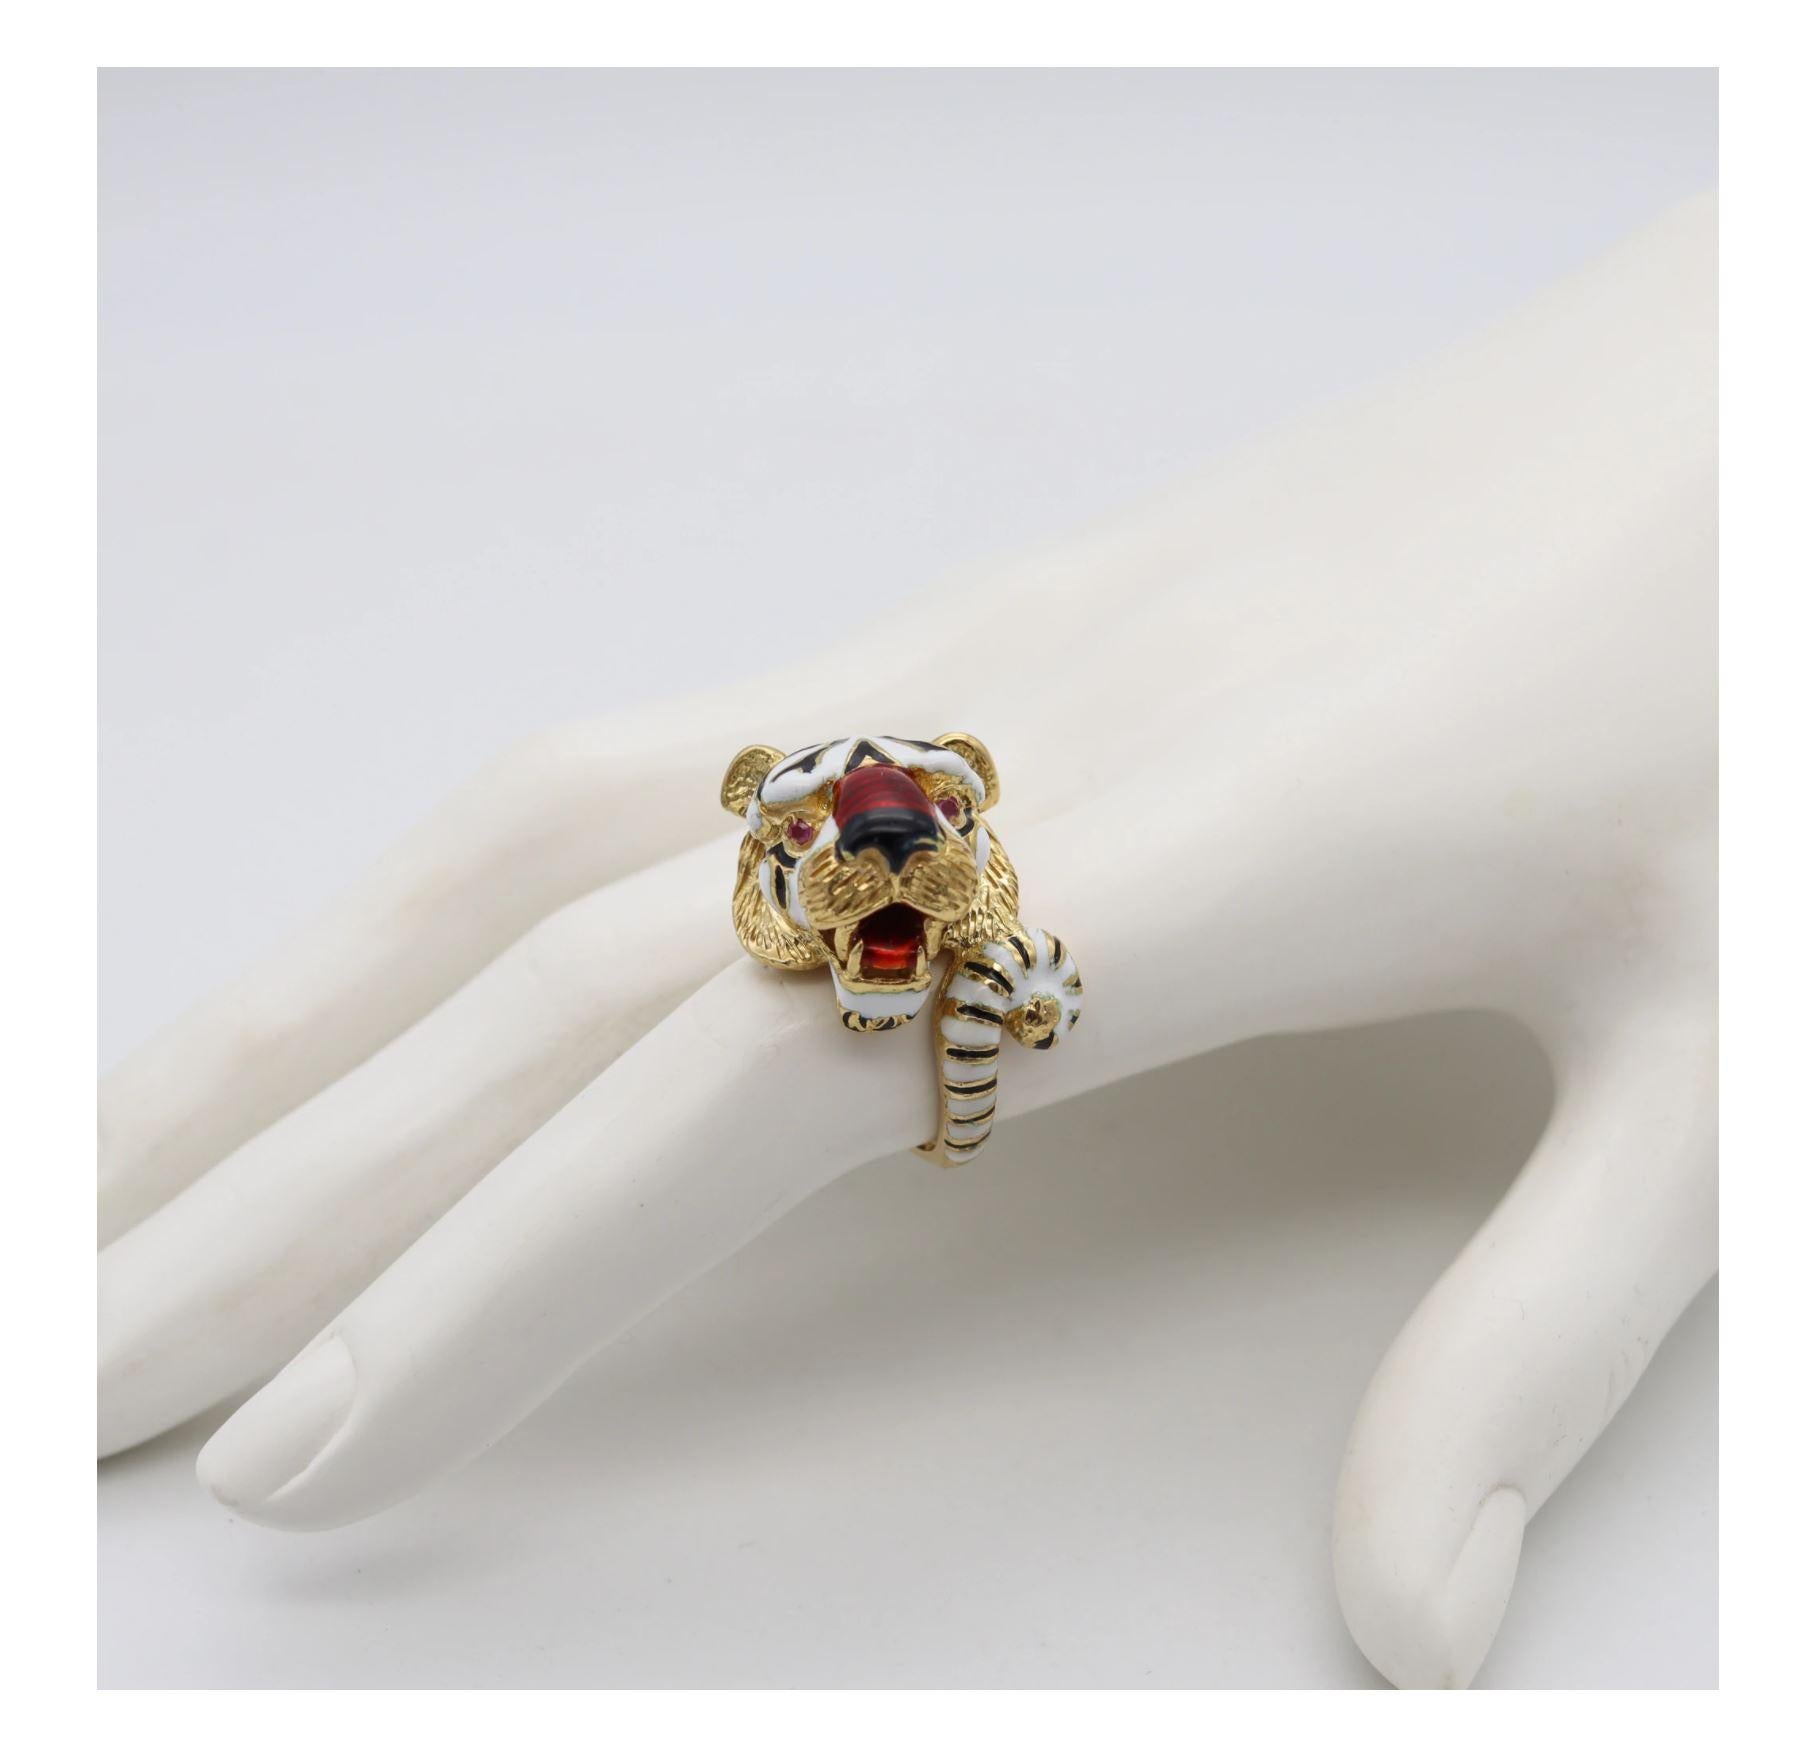 Frascarolo Milano Enameled Tiger Cocktail Ring in 18Kt Yellow Gold with Rubies 1